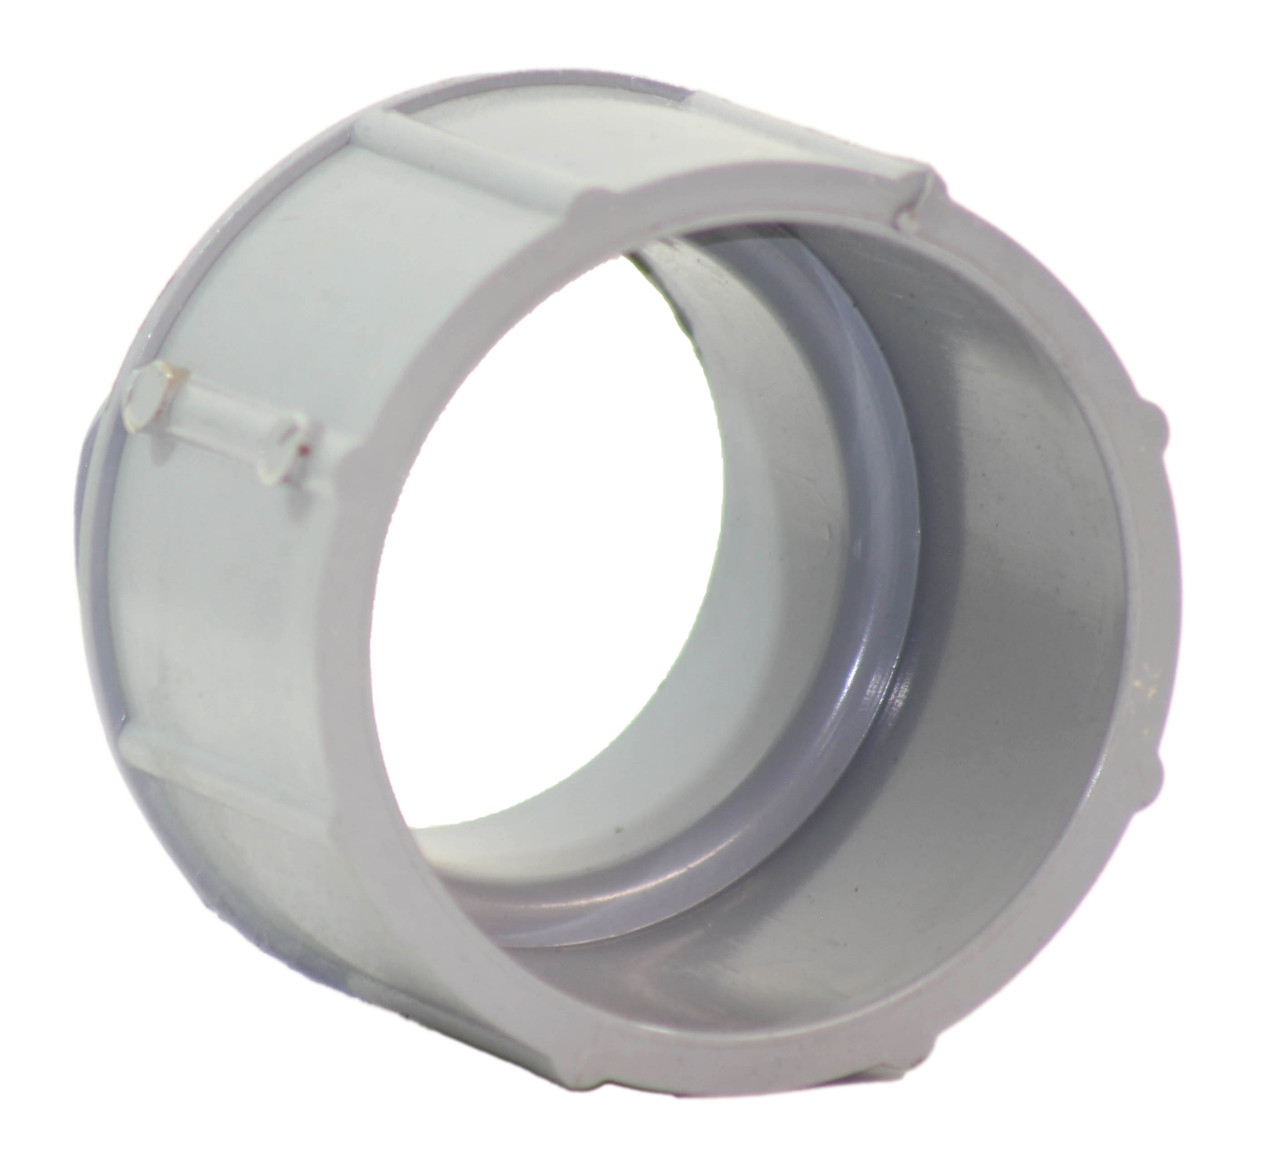 Cantex 5140109 Threaded Connector Material: PVC Size: 2-1/2 Inch